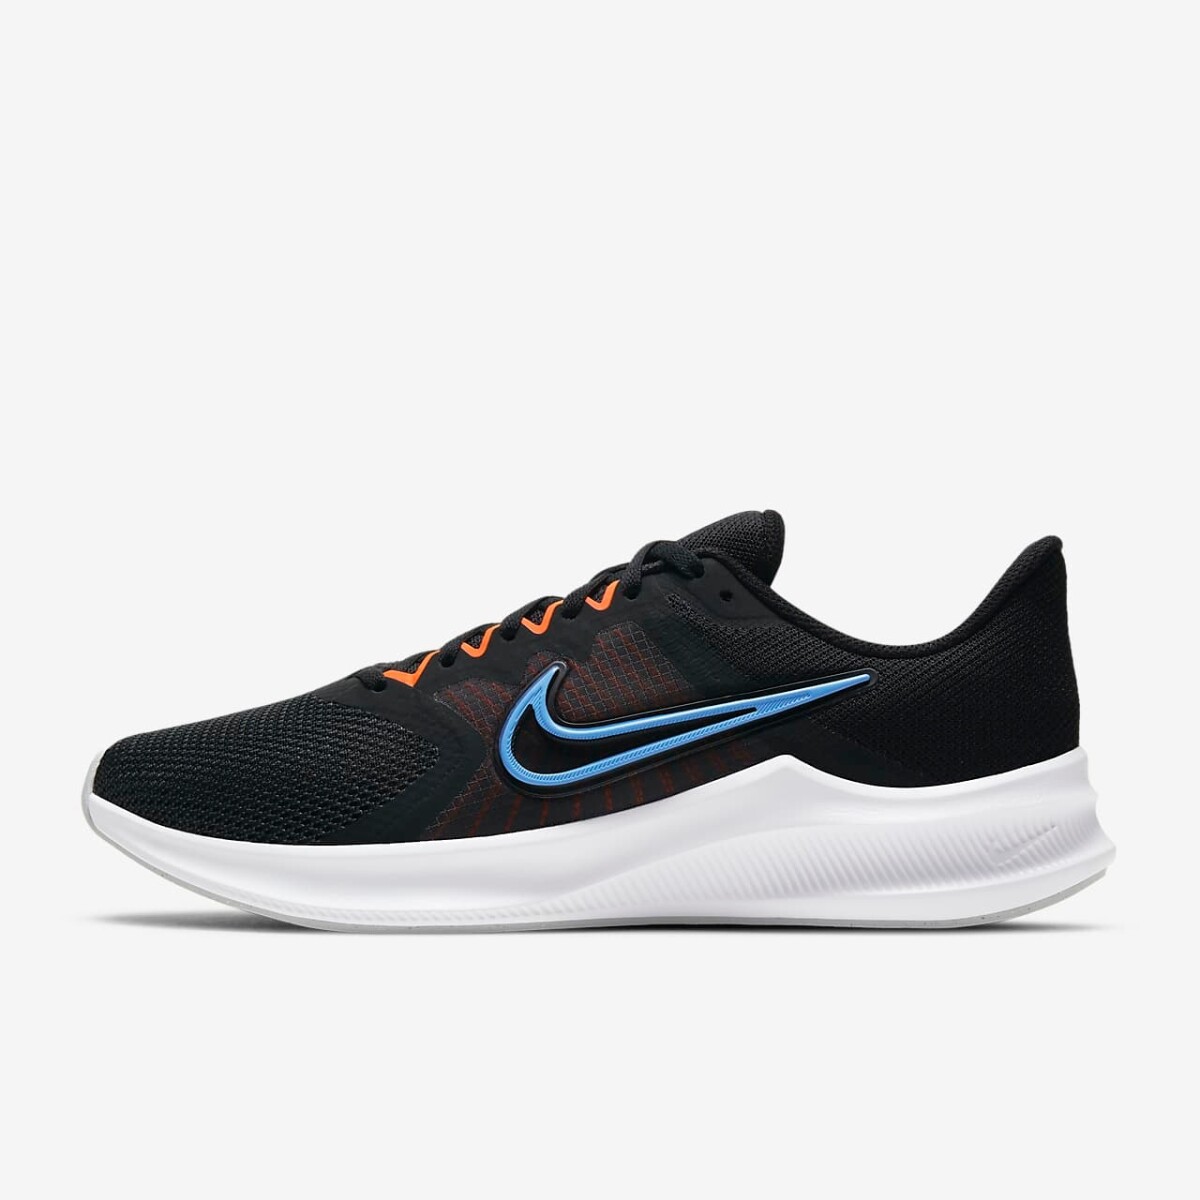 Champion Nike Running Hombre Downshifter 11 o - Color Único 